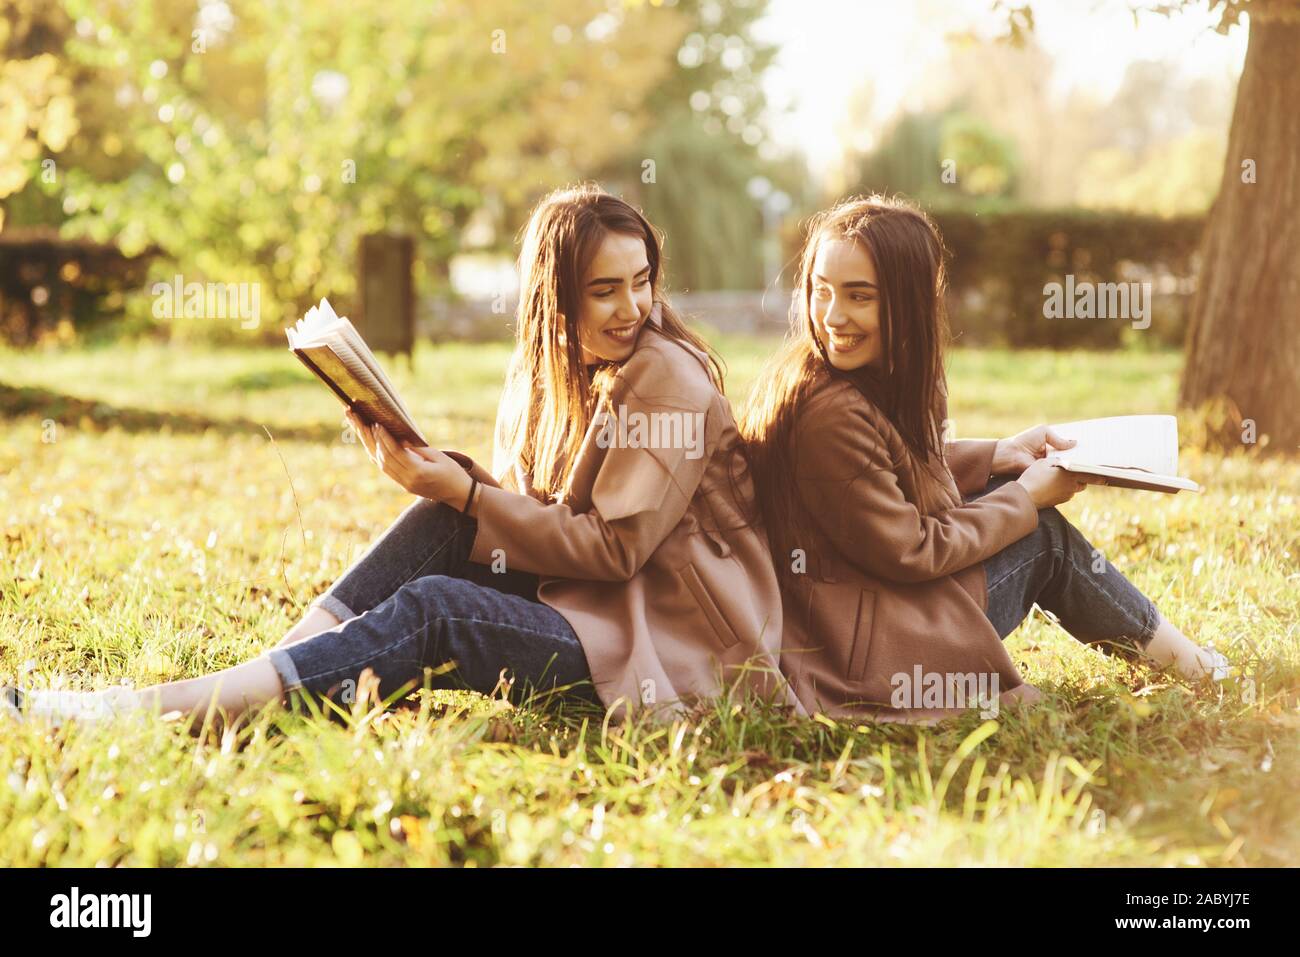 Smiling brunette twin girls sitting back to back on the grass and looking at each other, legs slightly bent in knees, with brown books in hands Stock Photo